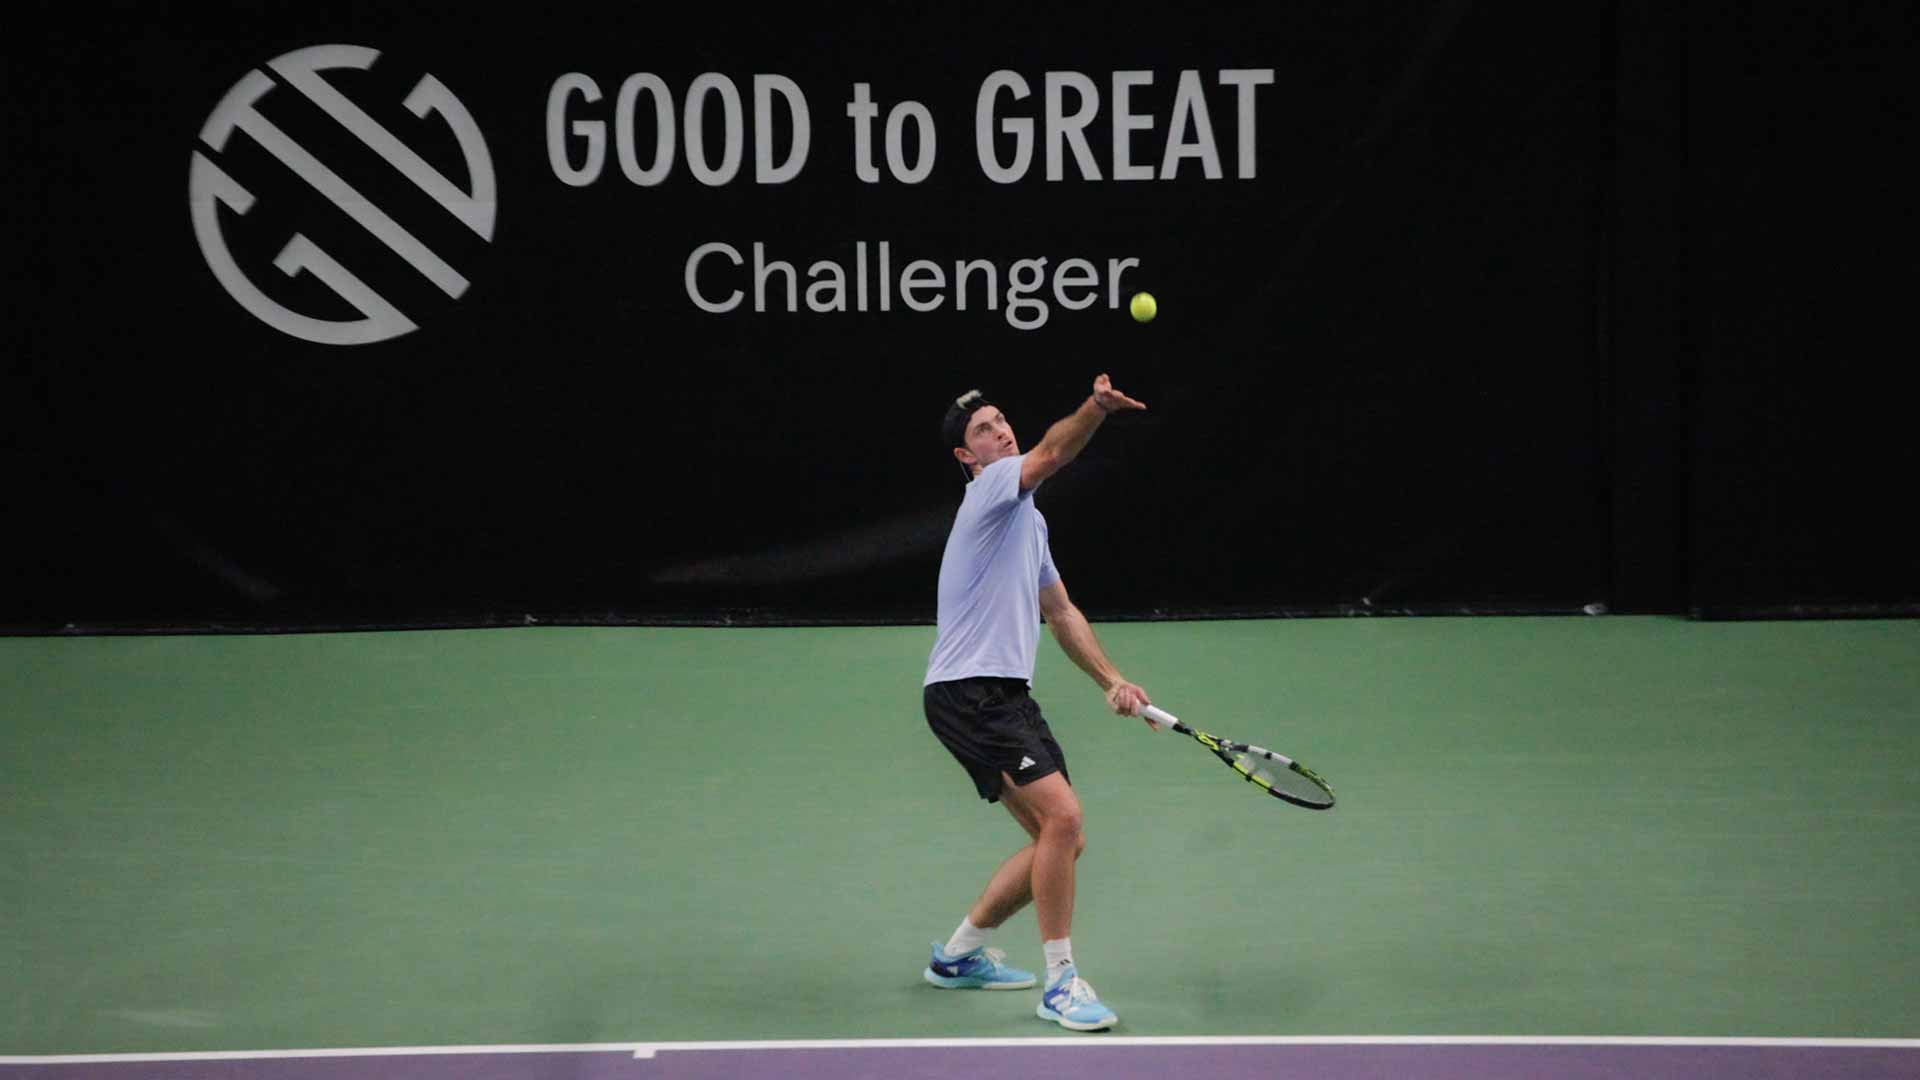 Good to Great Tennis Academy hosts the ATP Challenger Tour event in Danderyd, Sweden.